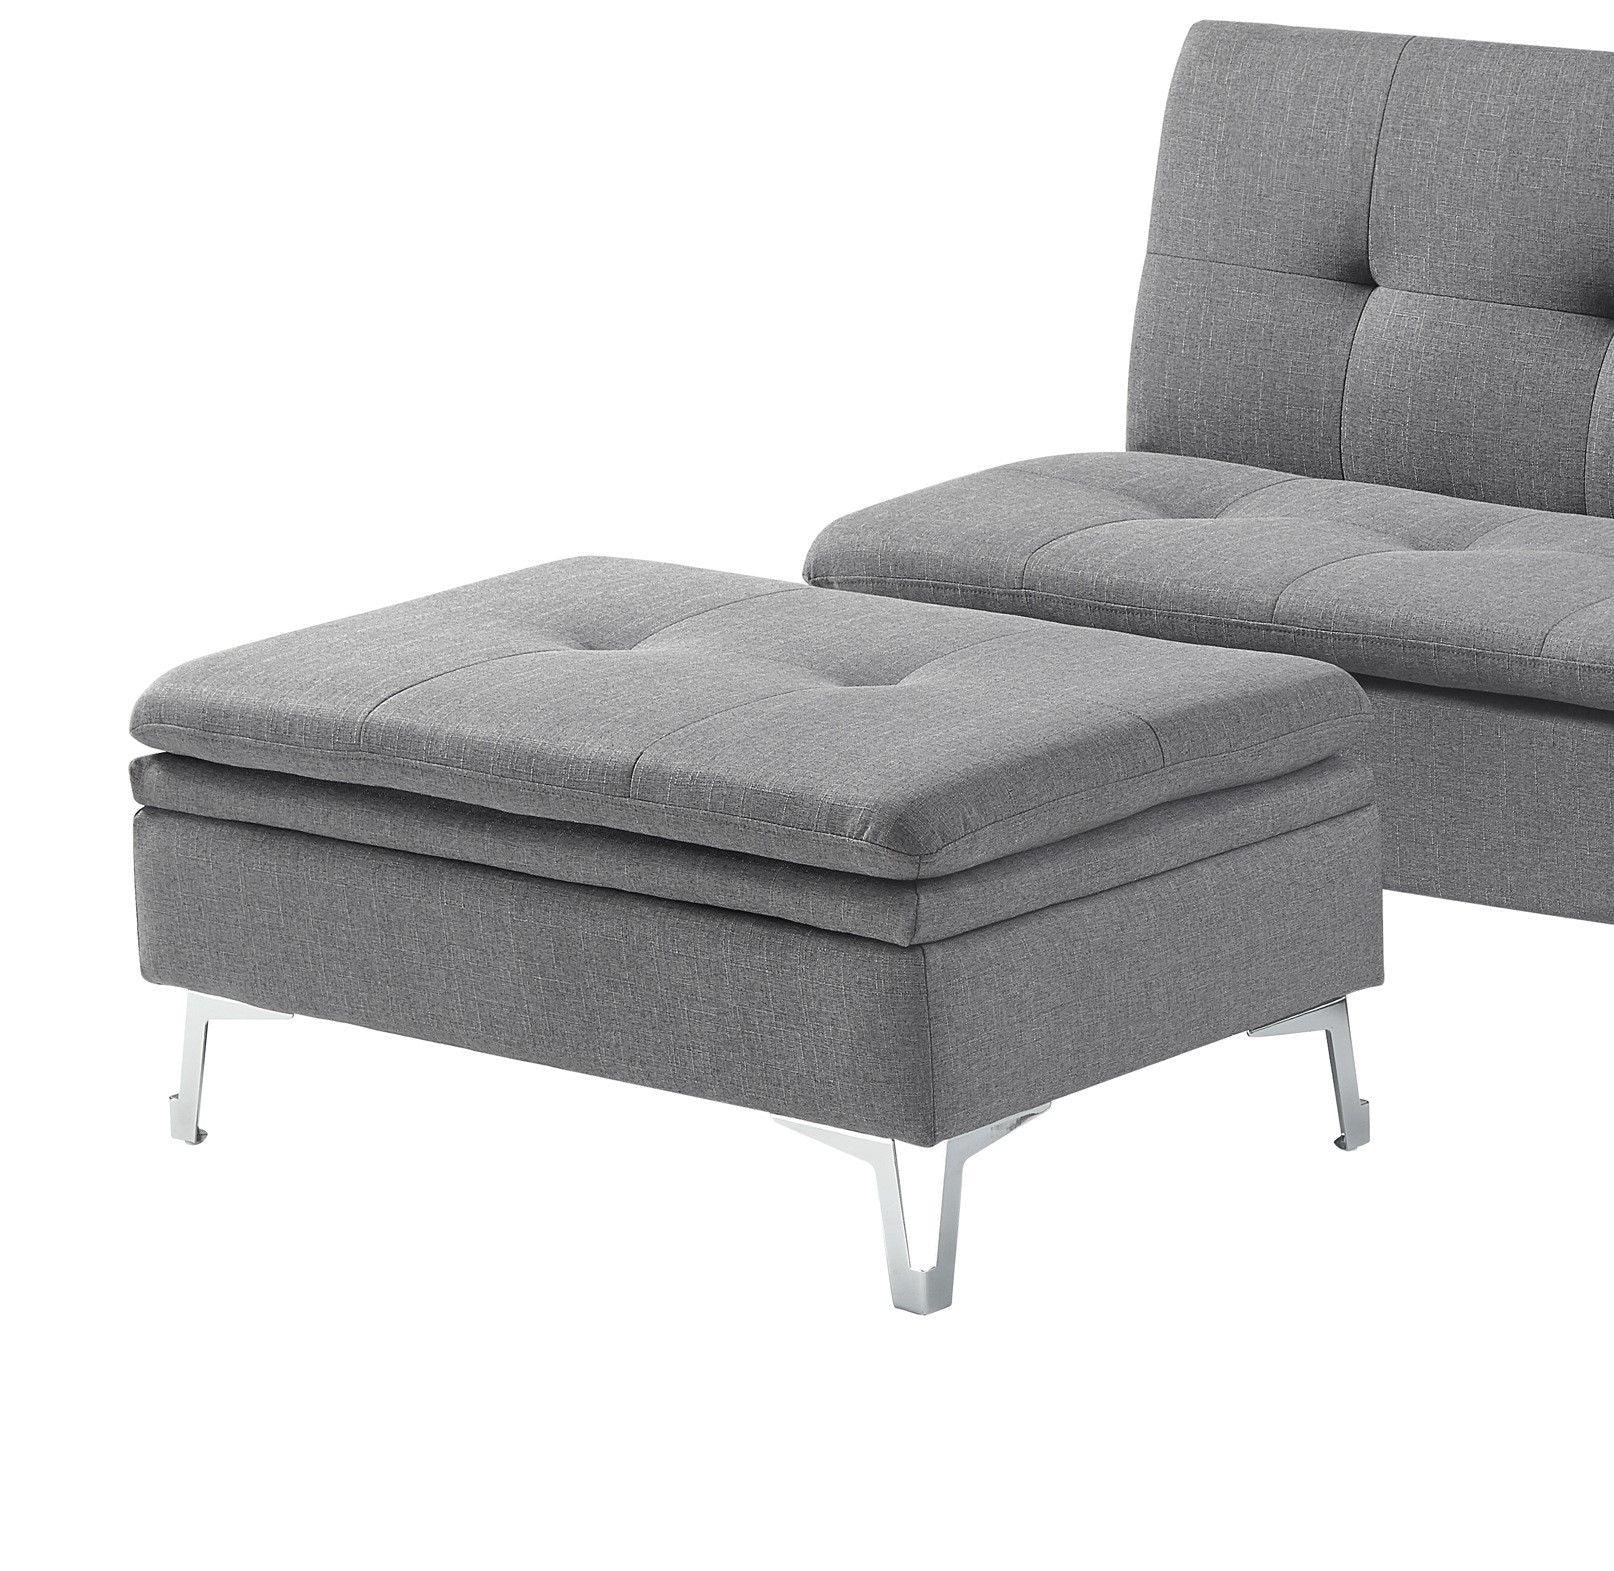 Casual Style Storage Ottoman 1 Piece Gray Color Fabric Upholstered Metal Legs Living Room Furniture